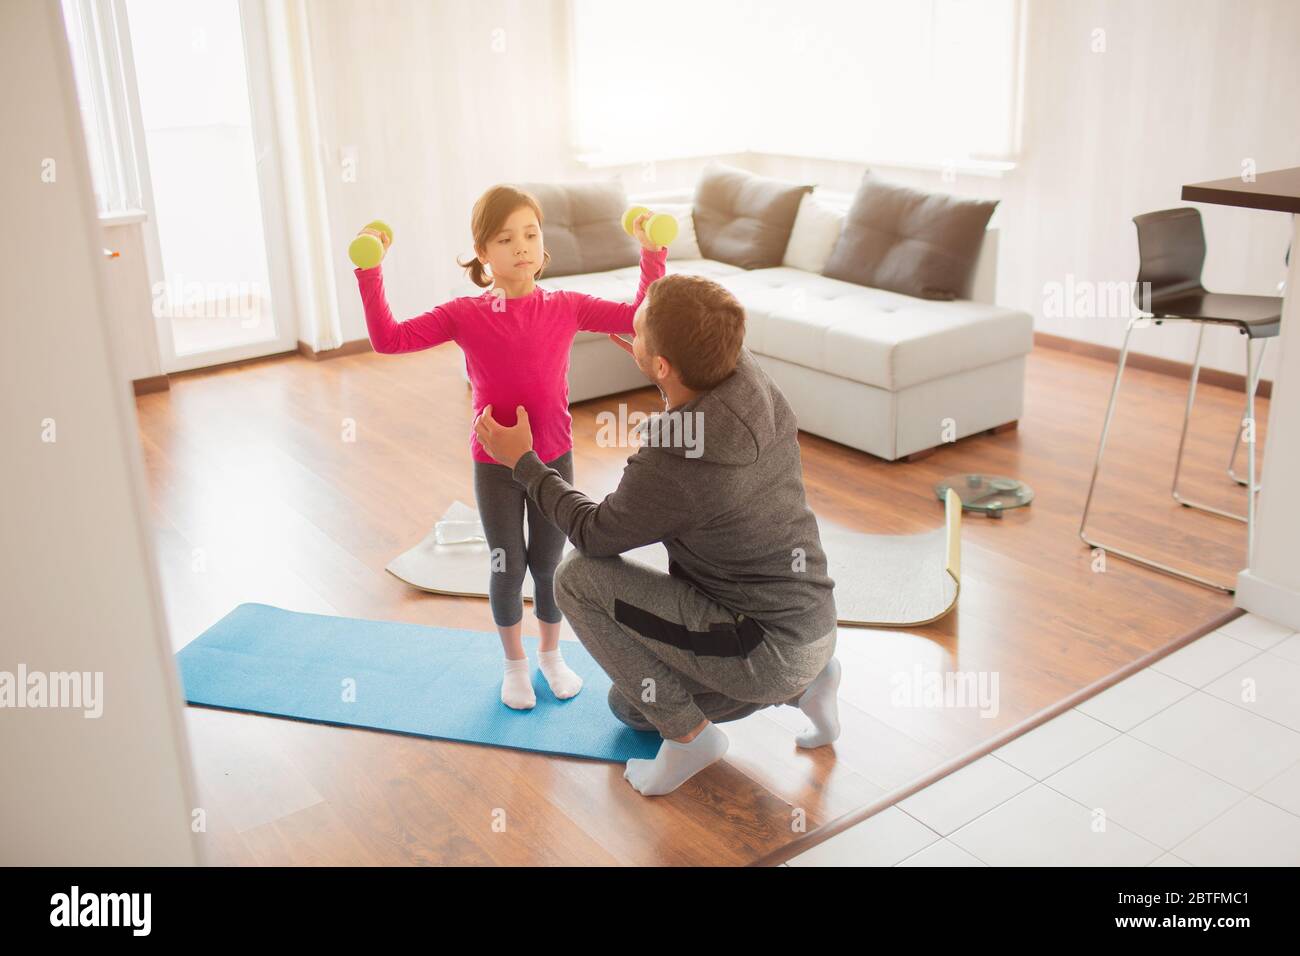 father and daughter are training at home. Workout in the apartment. Sports at home. They are standing on a yoga mat. Girl holding dumbbell. Stock Photo